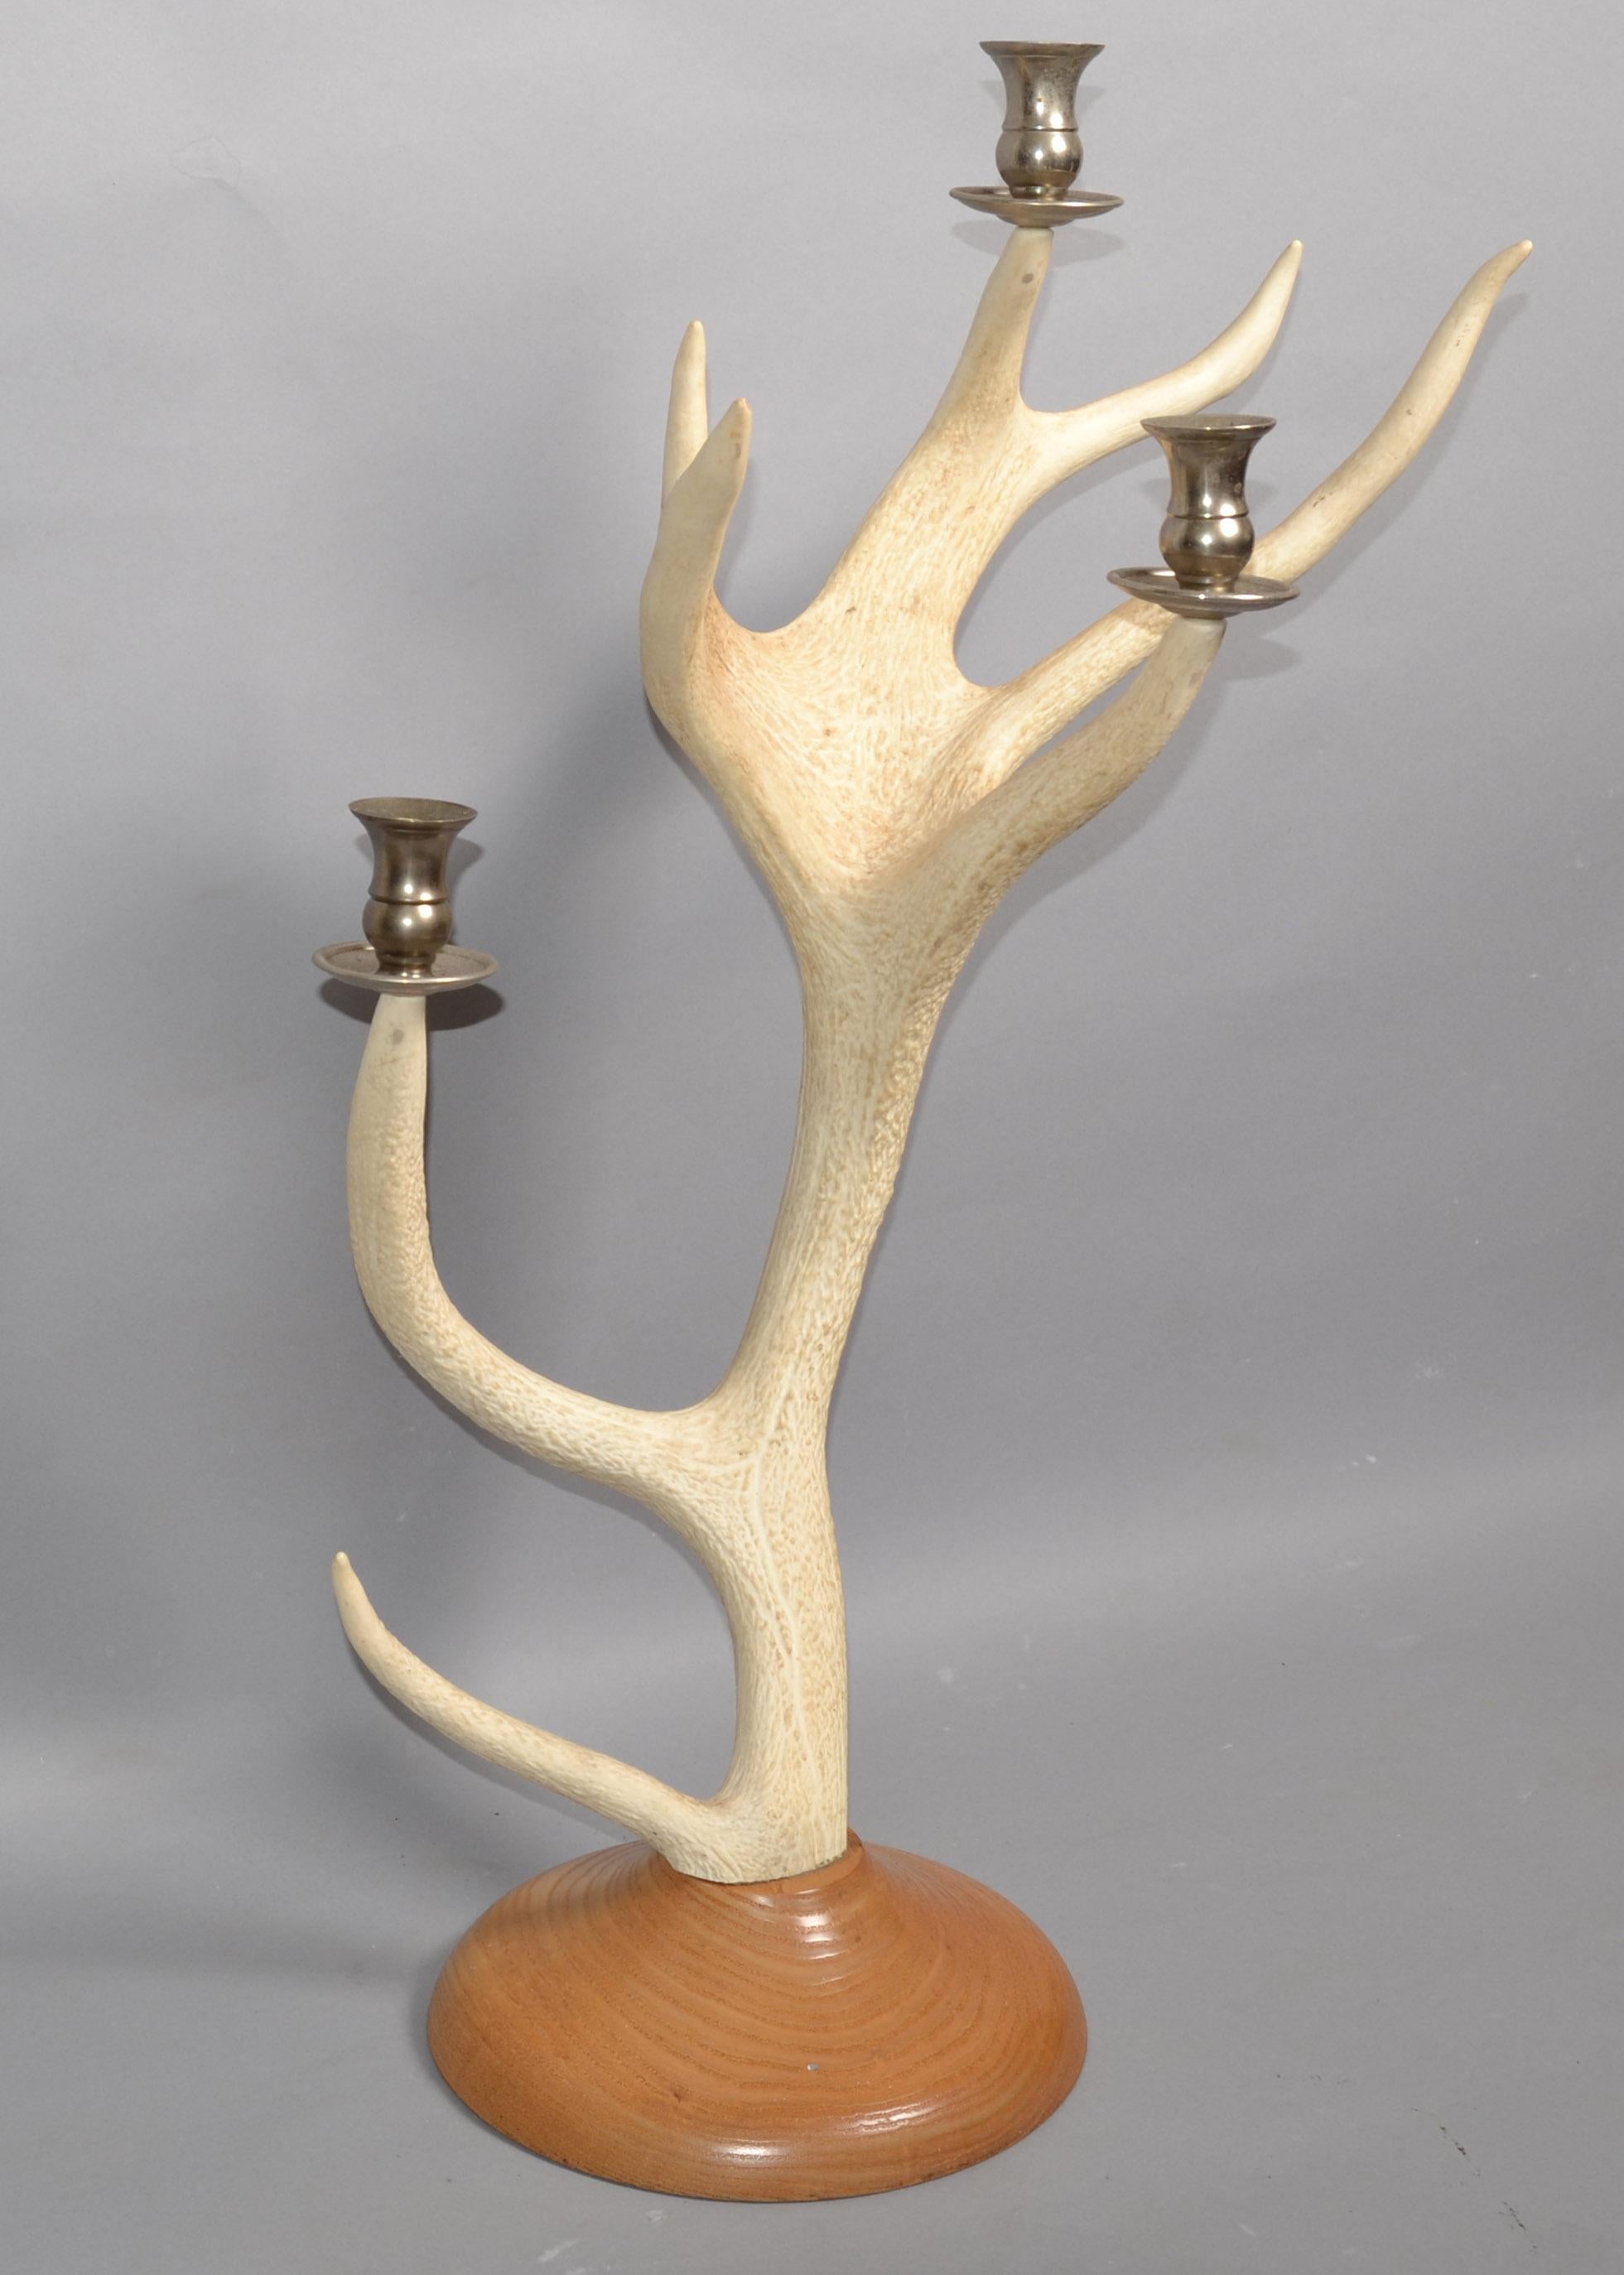 In the Style of Christian Dior Mid-Century Modern white tail deer buck antlers, horns Candle Holder mounted on a round oak wood base.
3 Steel Candle Holders are securely placed on Top of the Antler Arms. The base has a brown felt cover. 
Great